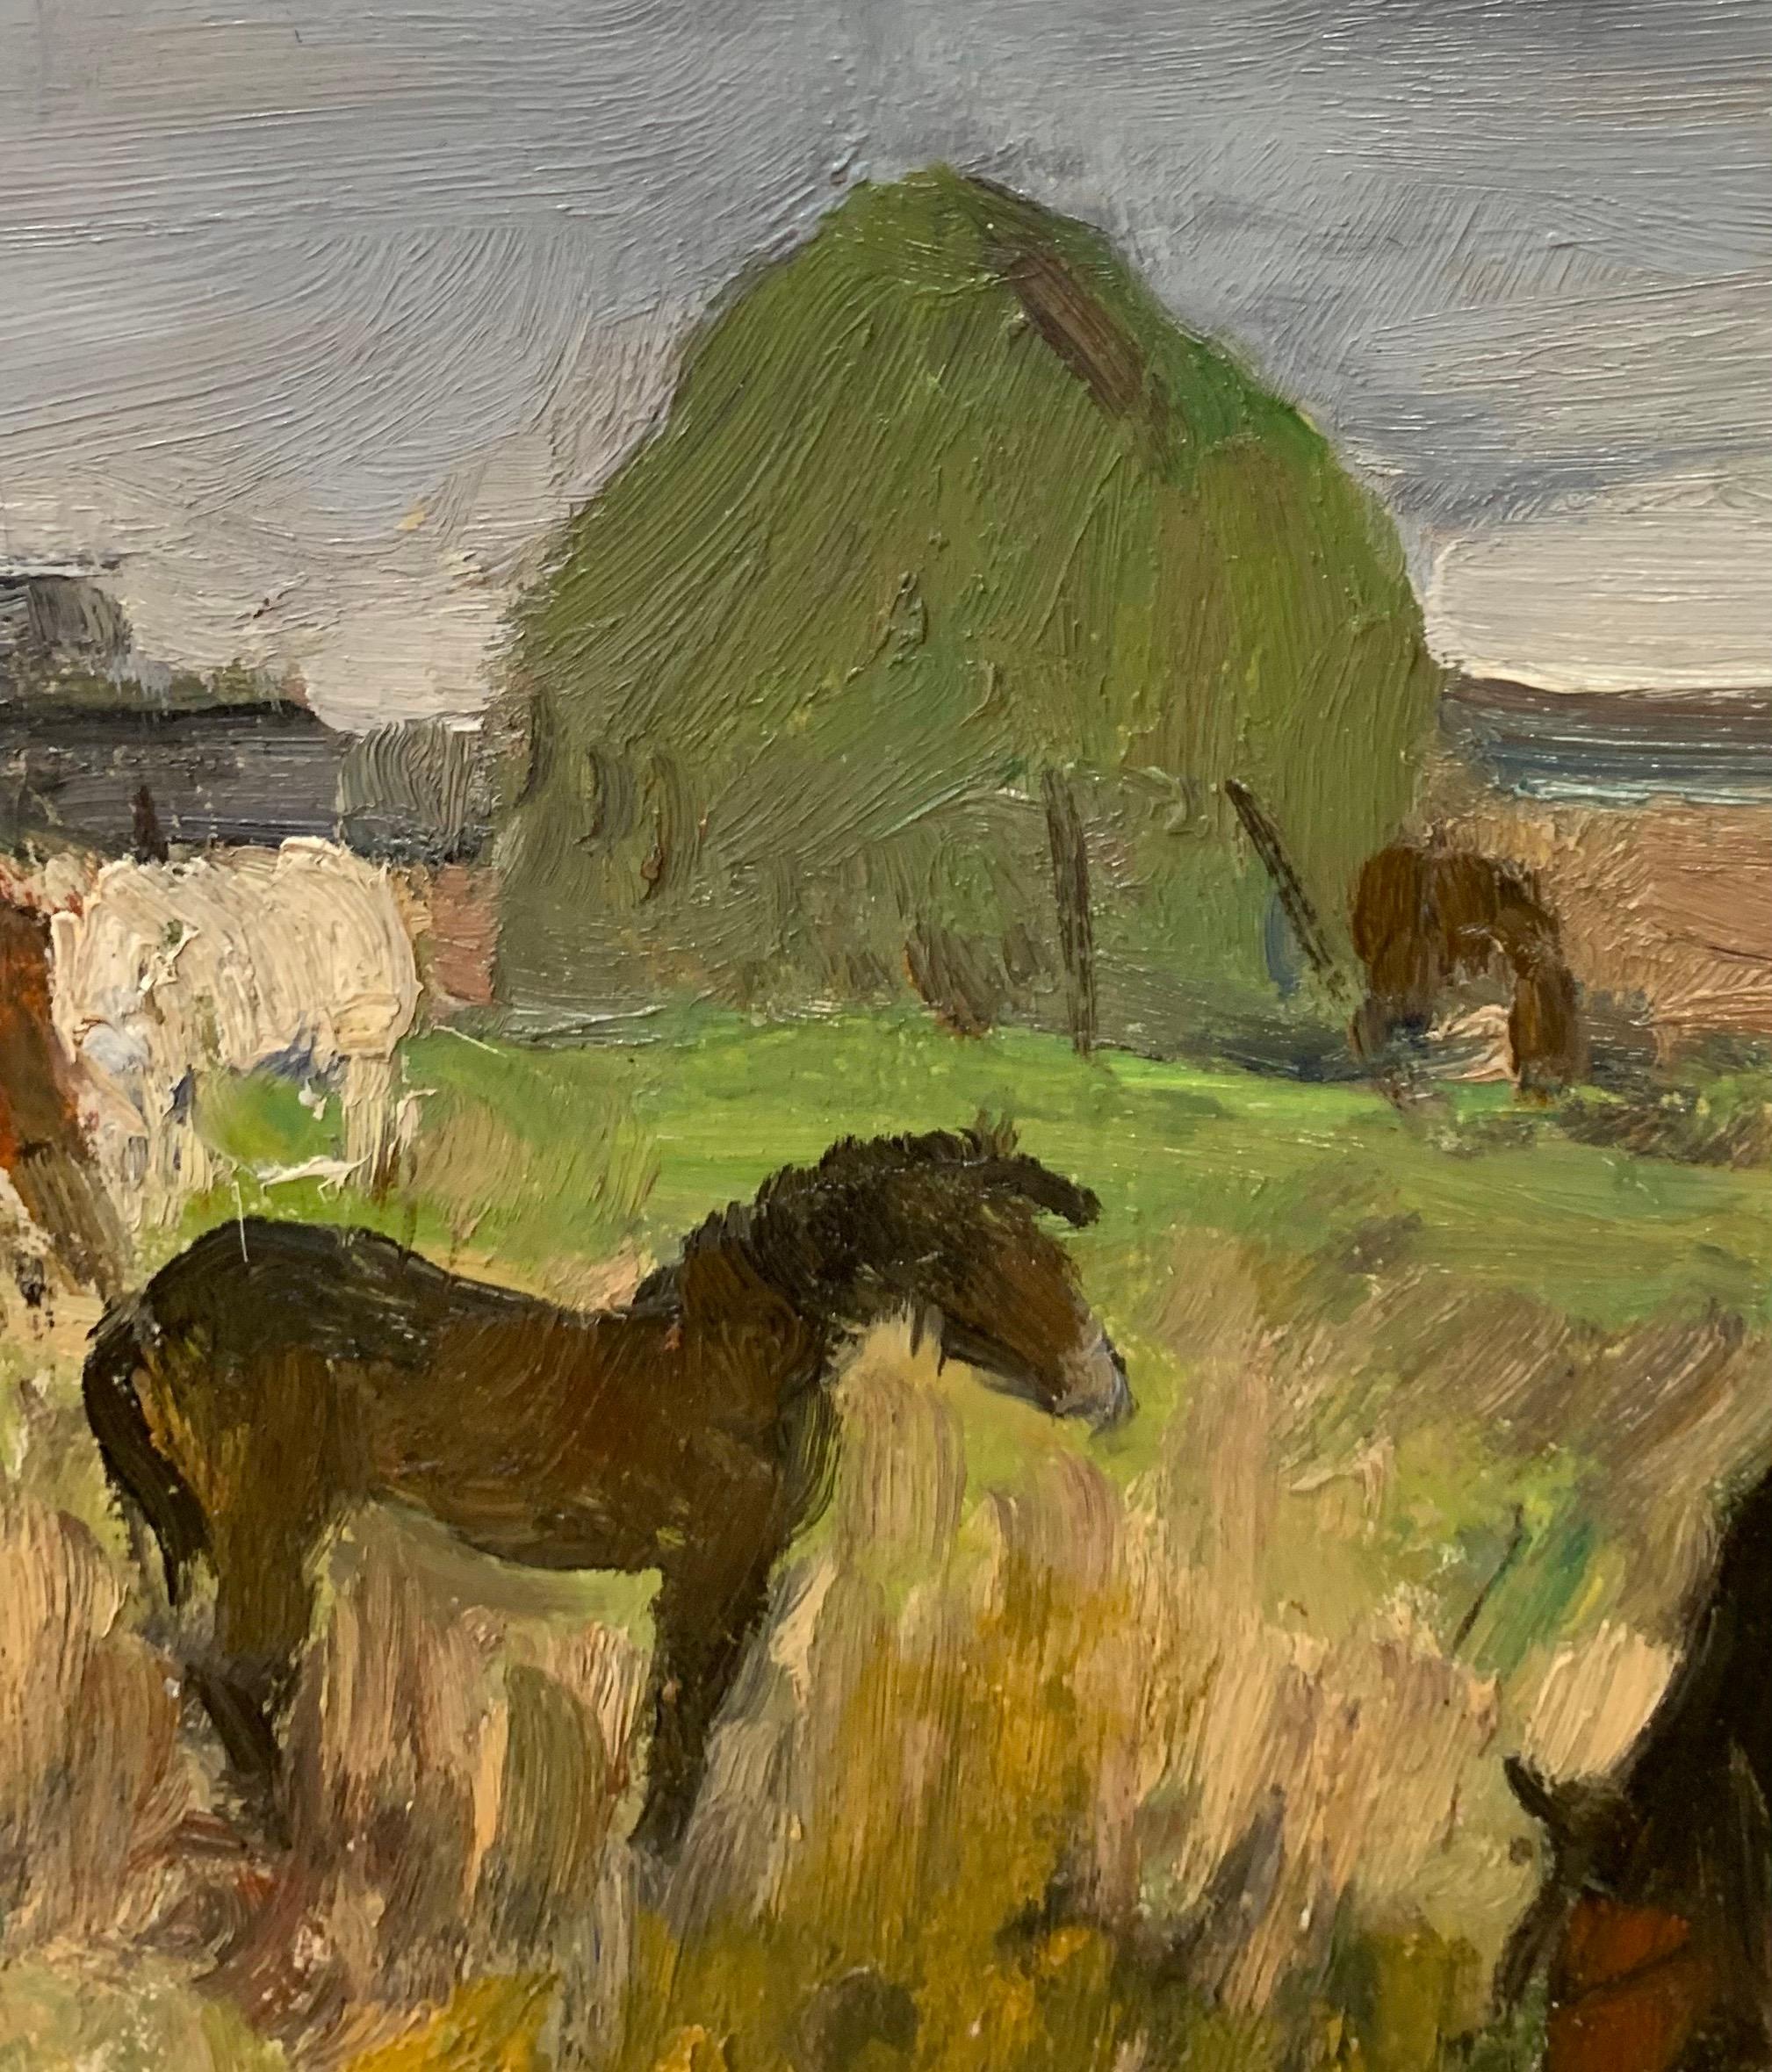 Horses, Countryside, Russia,1965

LEONID VAICHLIA  (St. Petersburg, 1922)

Works by Leonid Vaichlia can be found in various private collections in Europe, Japan, United States and in the following museums:


Mosca, The Ministry of Culture